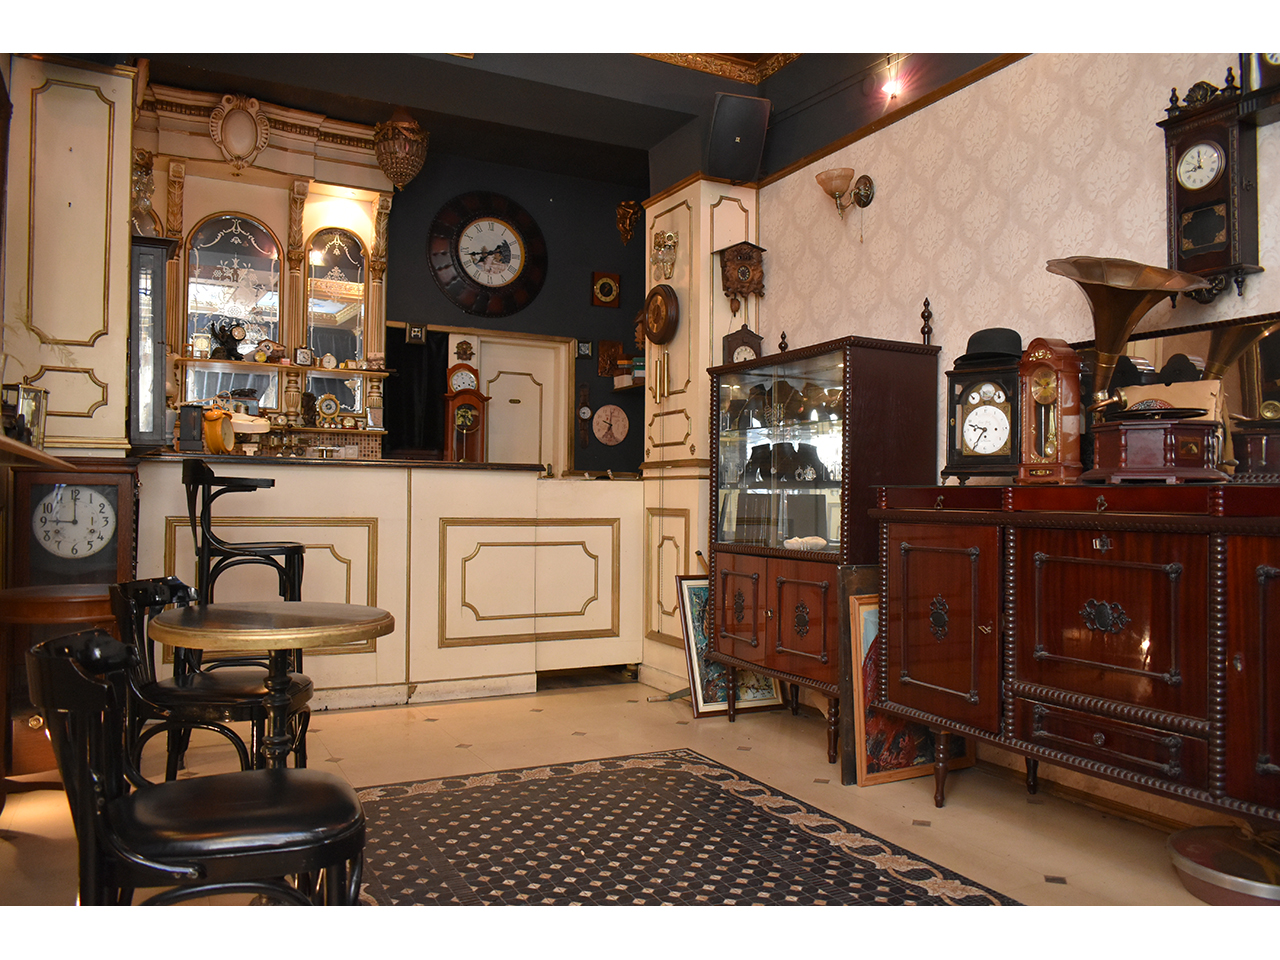 WATCHMAKER PAVIC - ATELIER OF JEWELERY AND ANTIQUES Watchmakers Beograd